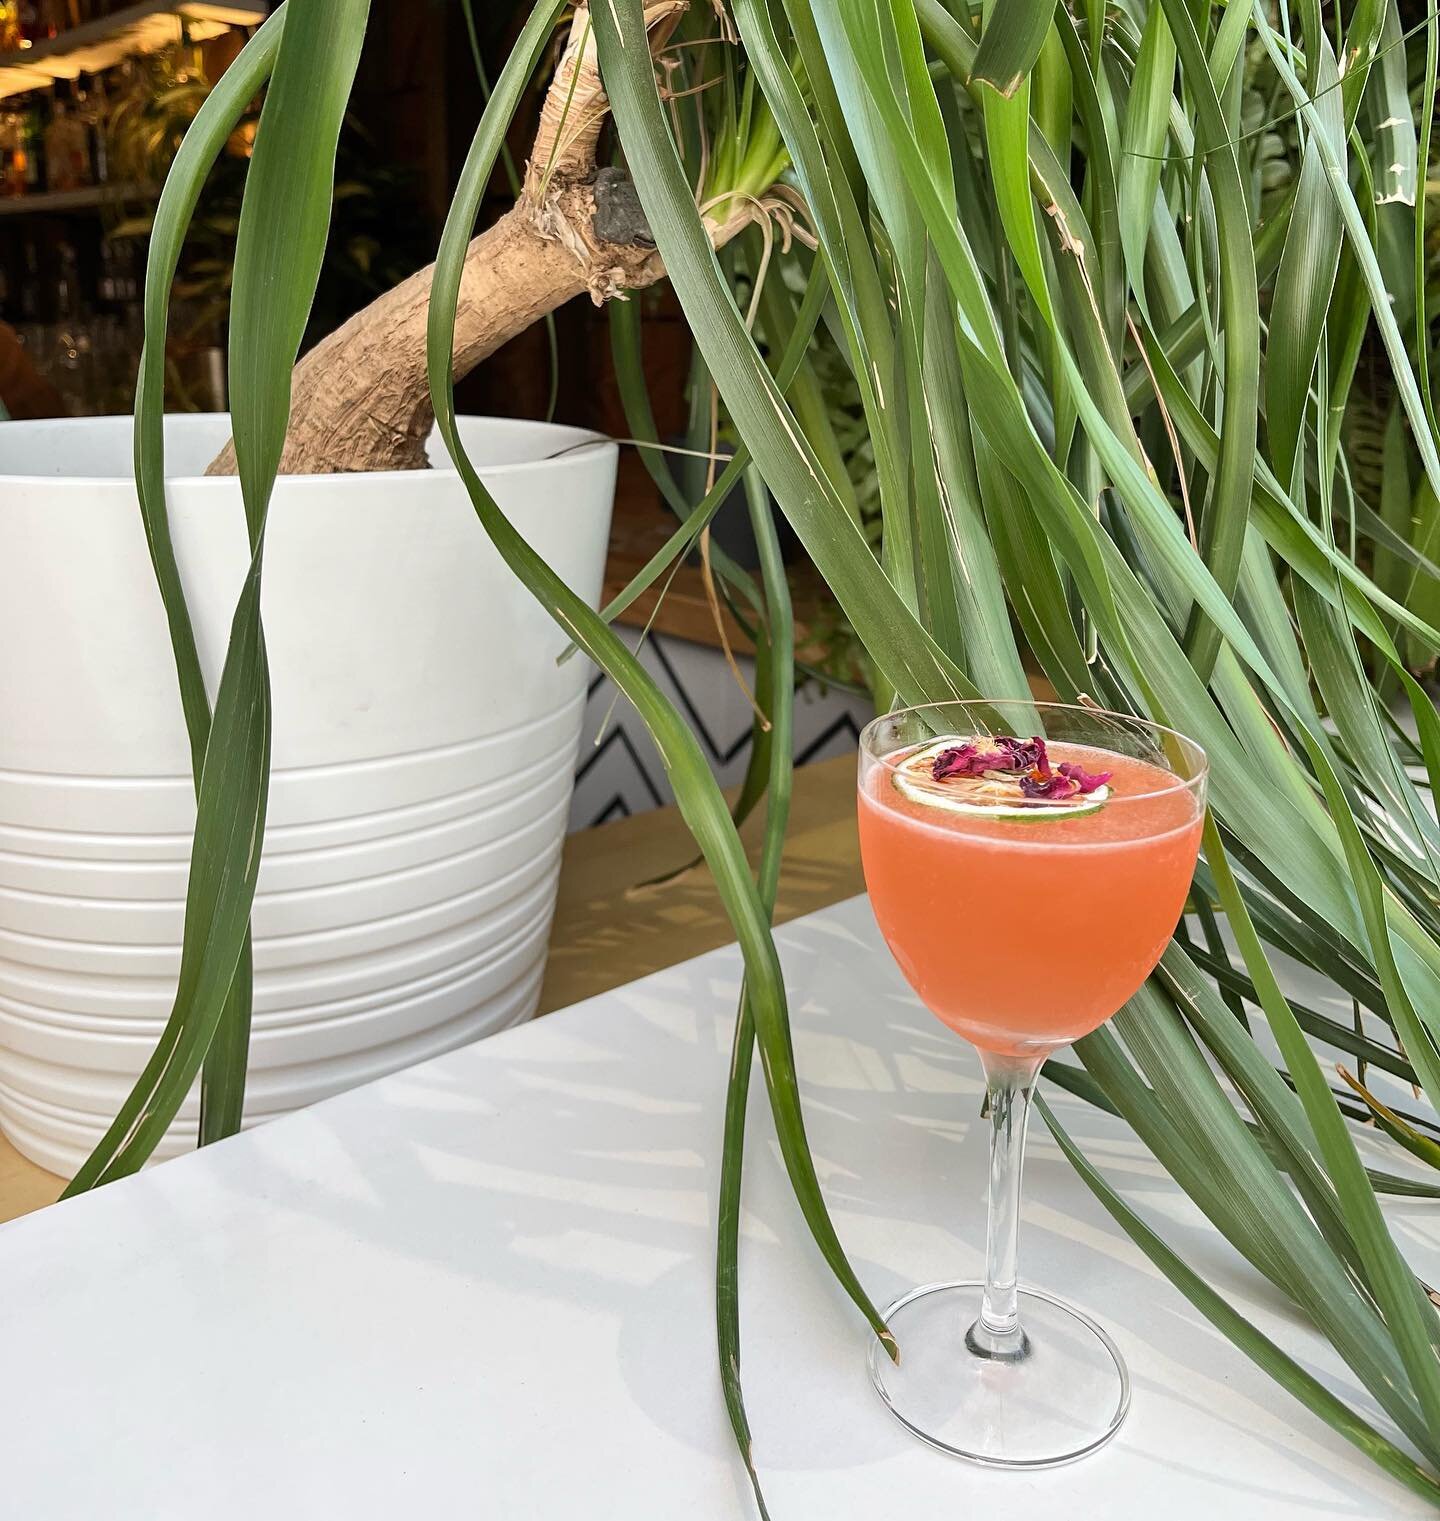 NEW FEATURE OF THE MONTH: The Desert Rose. 
Gin, Aperol, Lime, Rose and Hibiscus are shaken for a bright floral daydream of a drink. A perfect pairing to that refreshing feeling of emerging from a bitter winter into a sunshine fueled spring.

#always